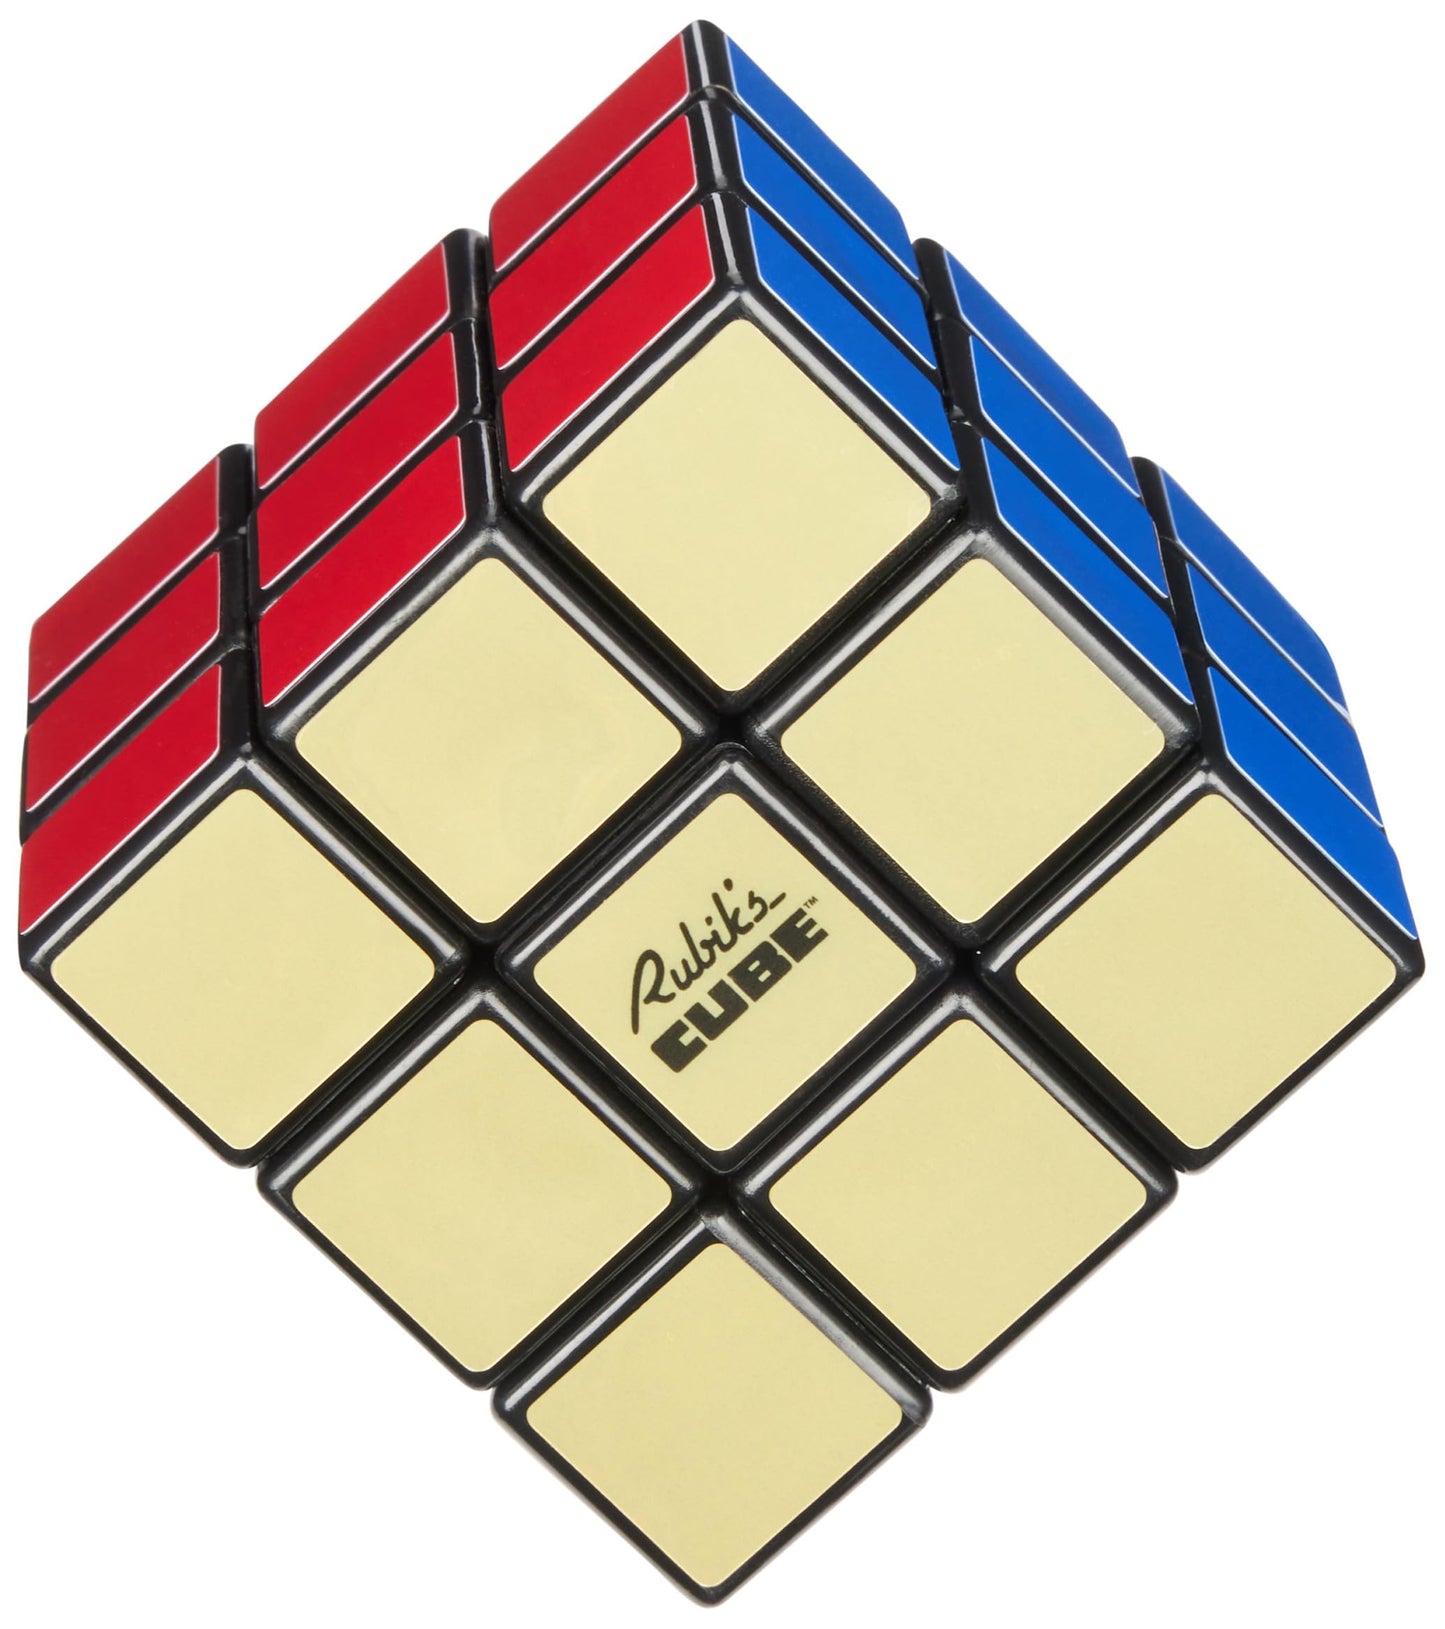 Rubik’s Cube, Special Retro 50th Anniversary Edition, Original 3x3 Color-Matching Puzzle Classic Problem-Solving Challenging Brain Teaser Fidget Toy, for Adults & Kids Ages 8+ - amzGamess